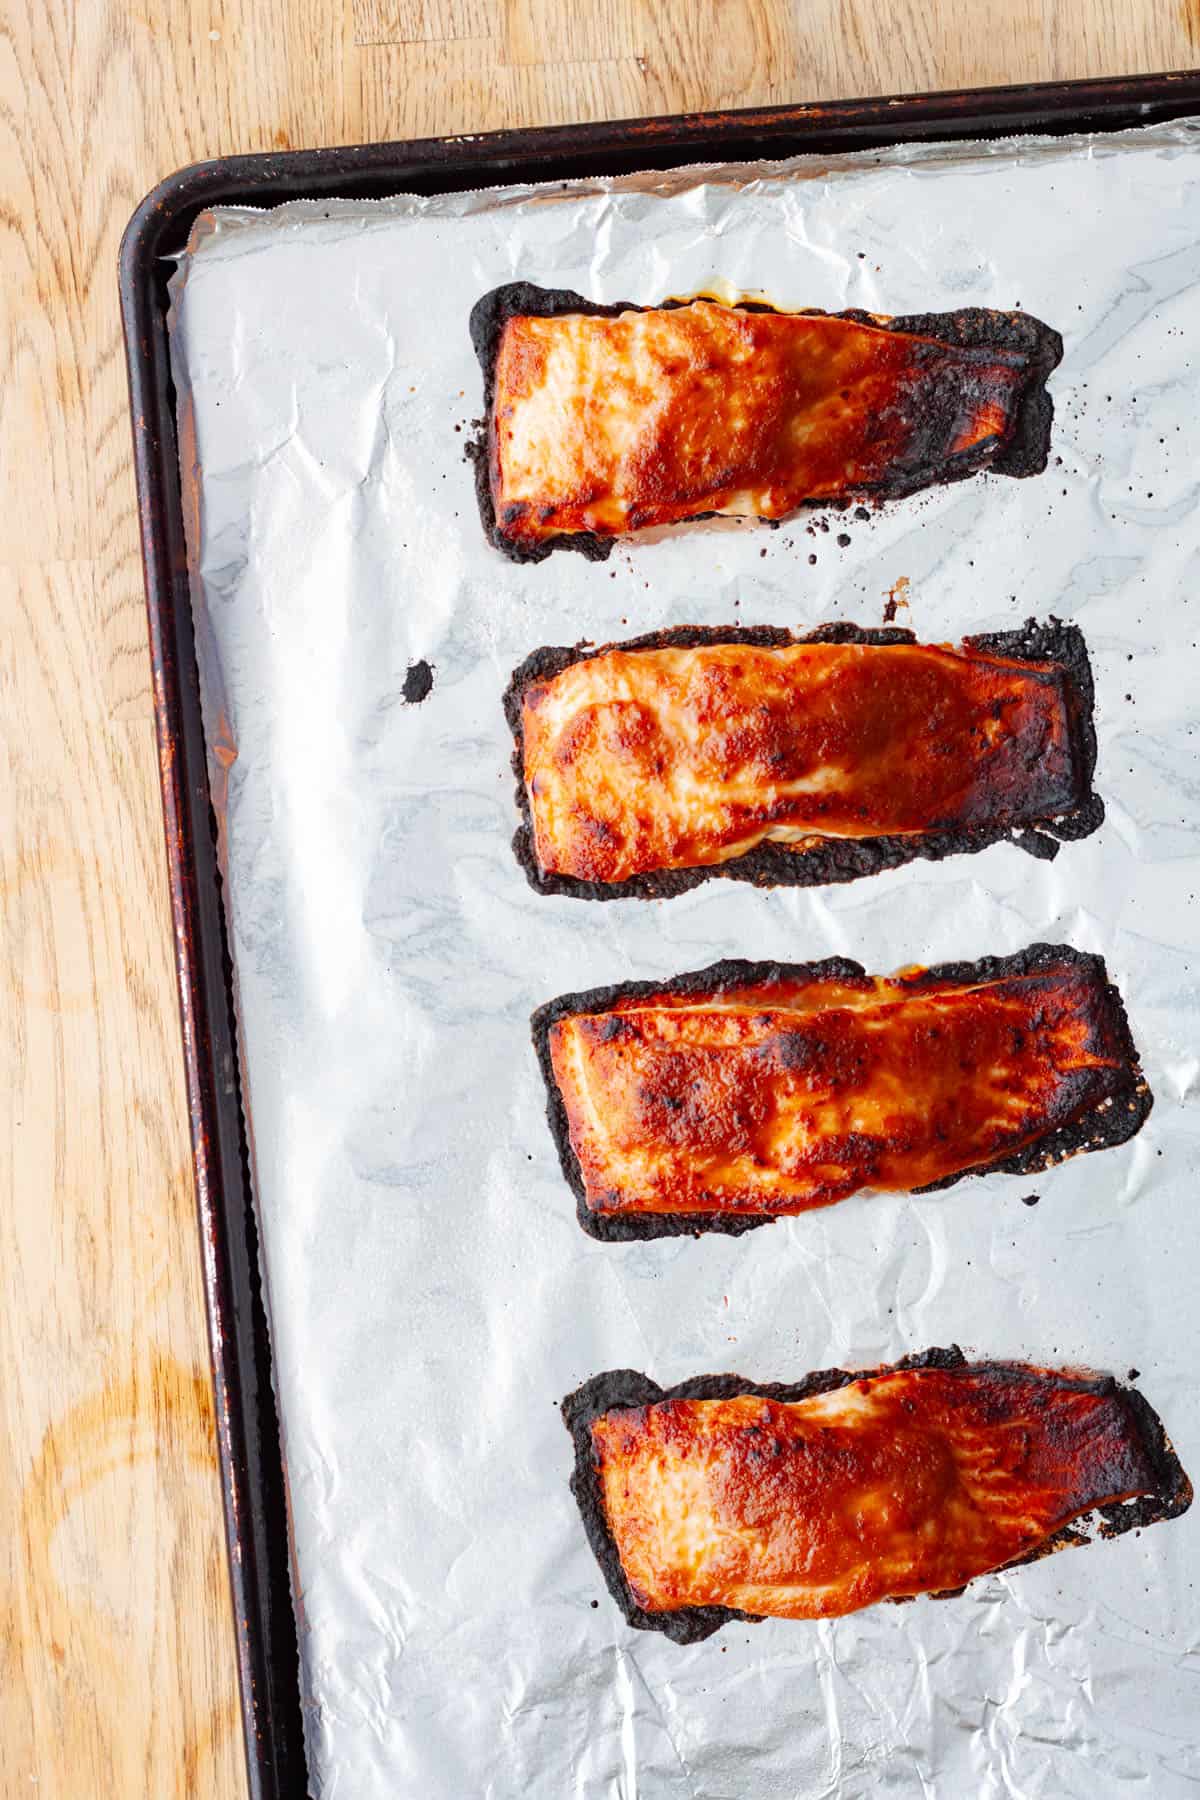 Portions of roasted and broiled miso salmon on a foil lined baking sheet.